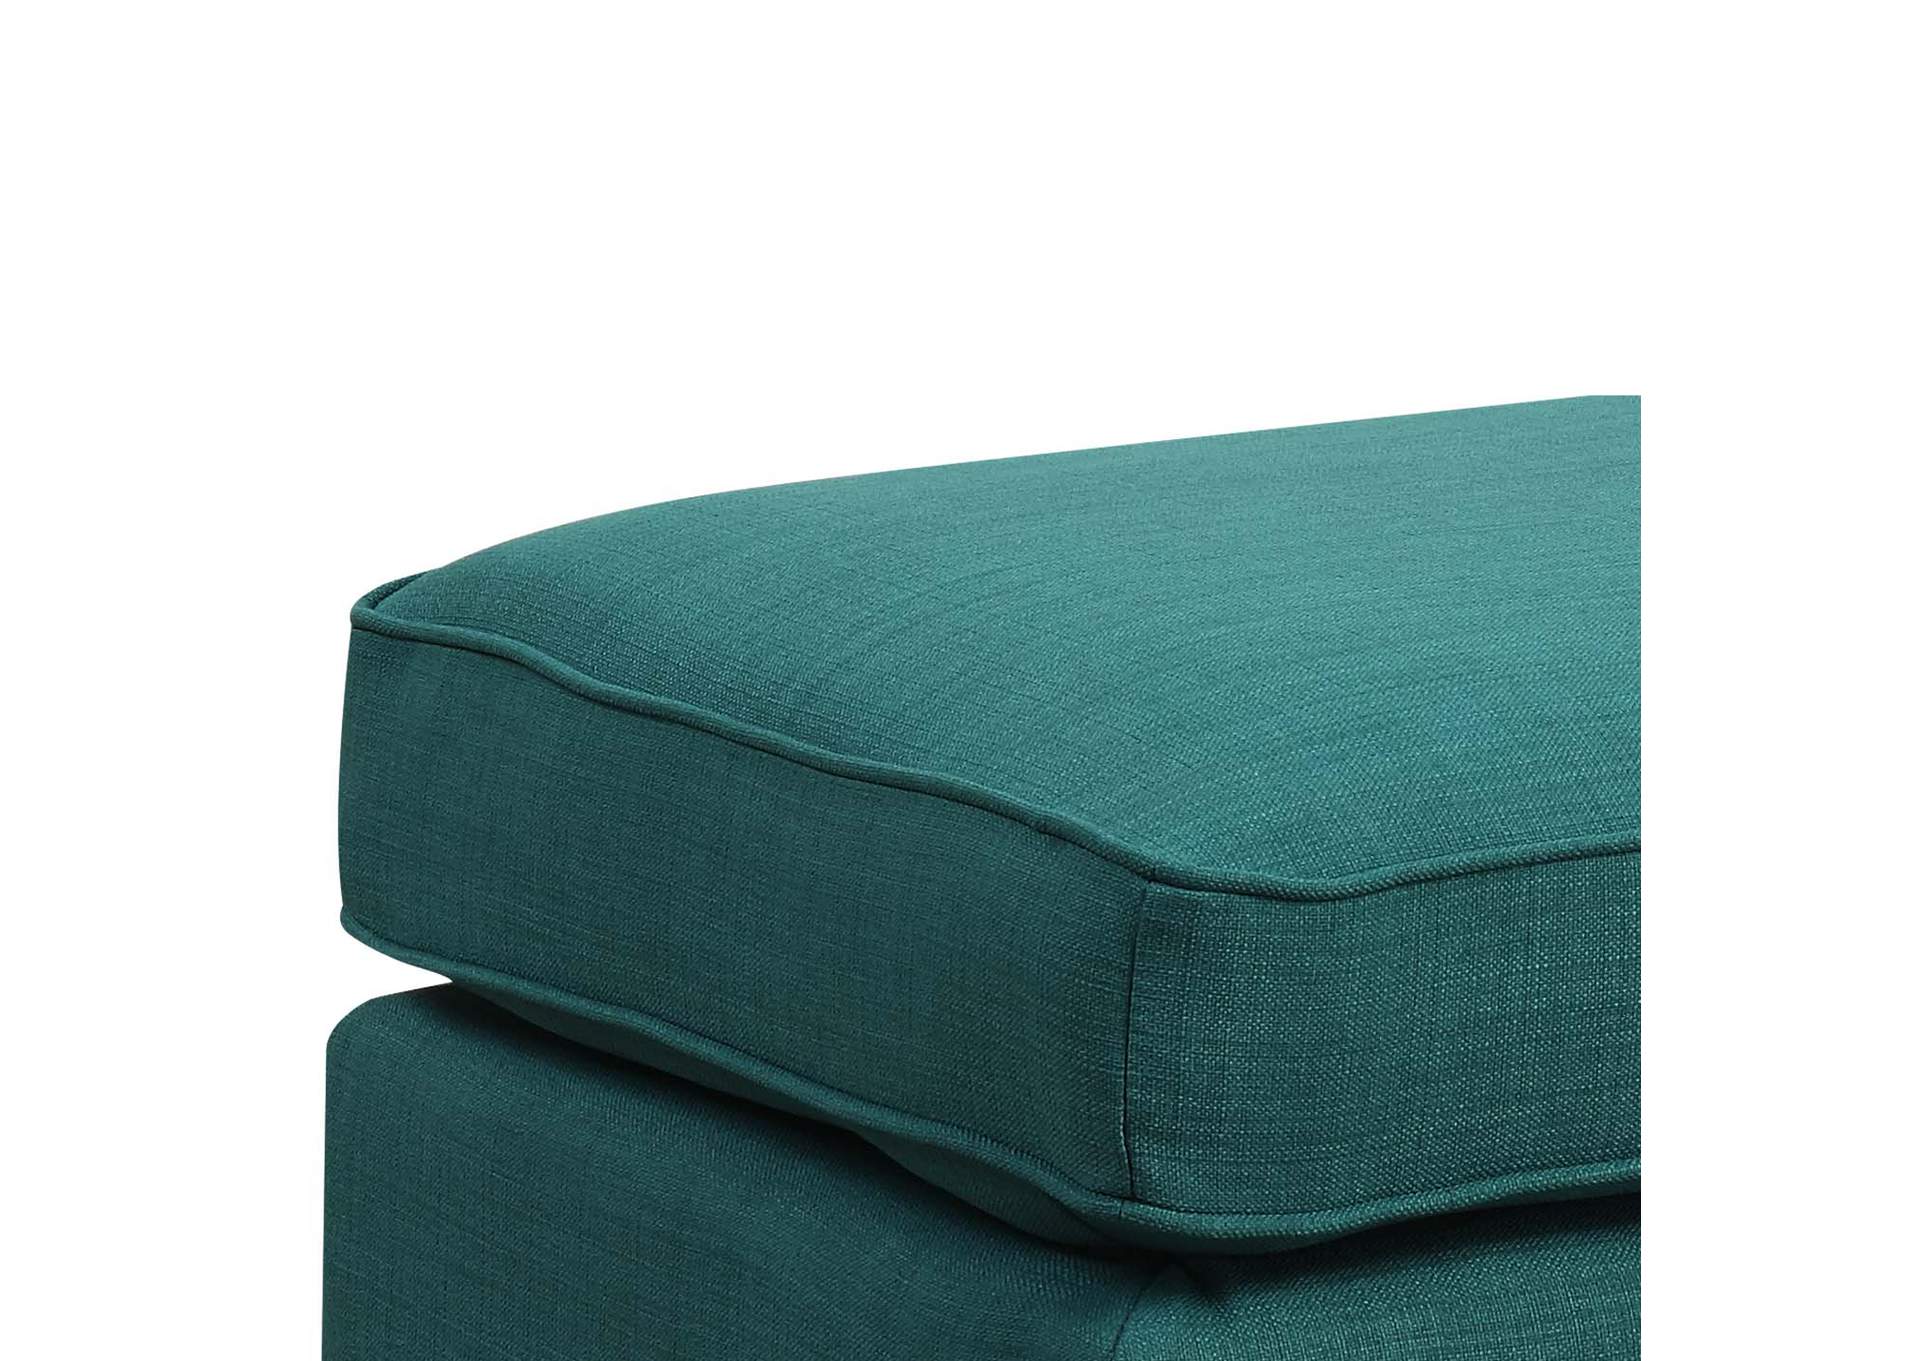 Erica 497 Ottoman With Chrome Nail Heirloome Teal,Elements